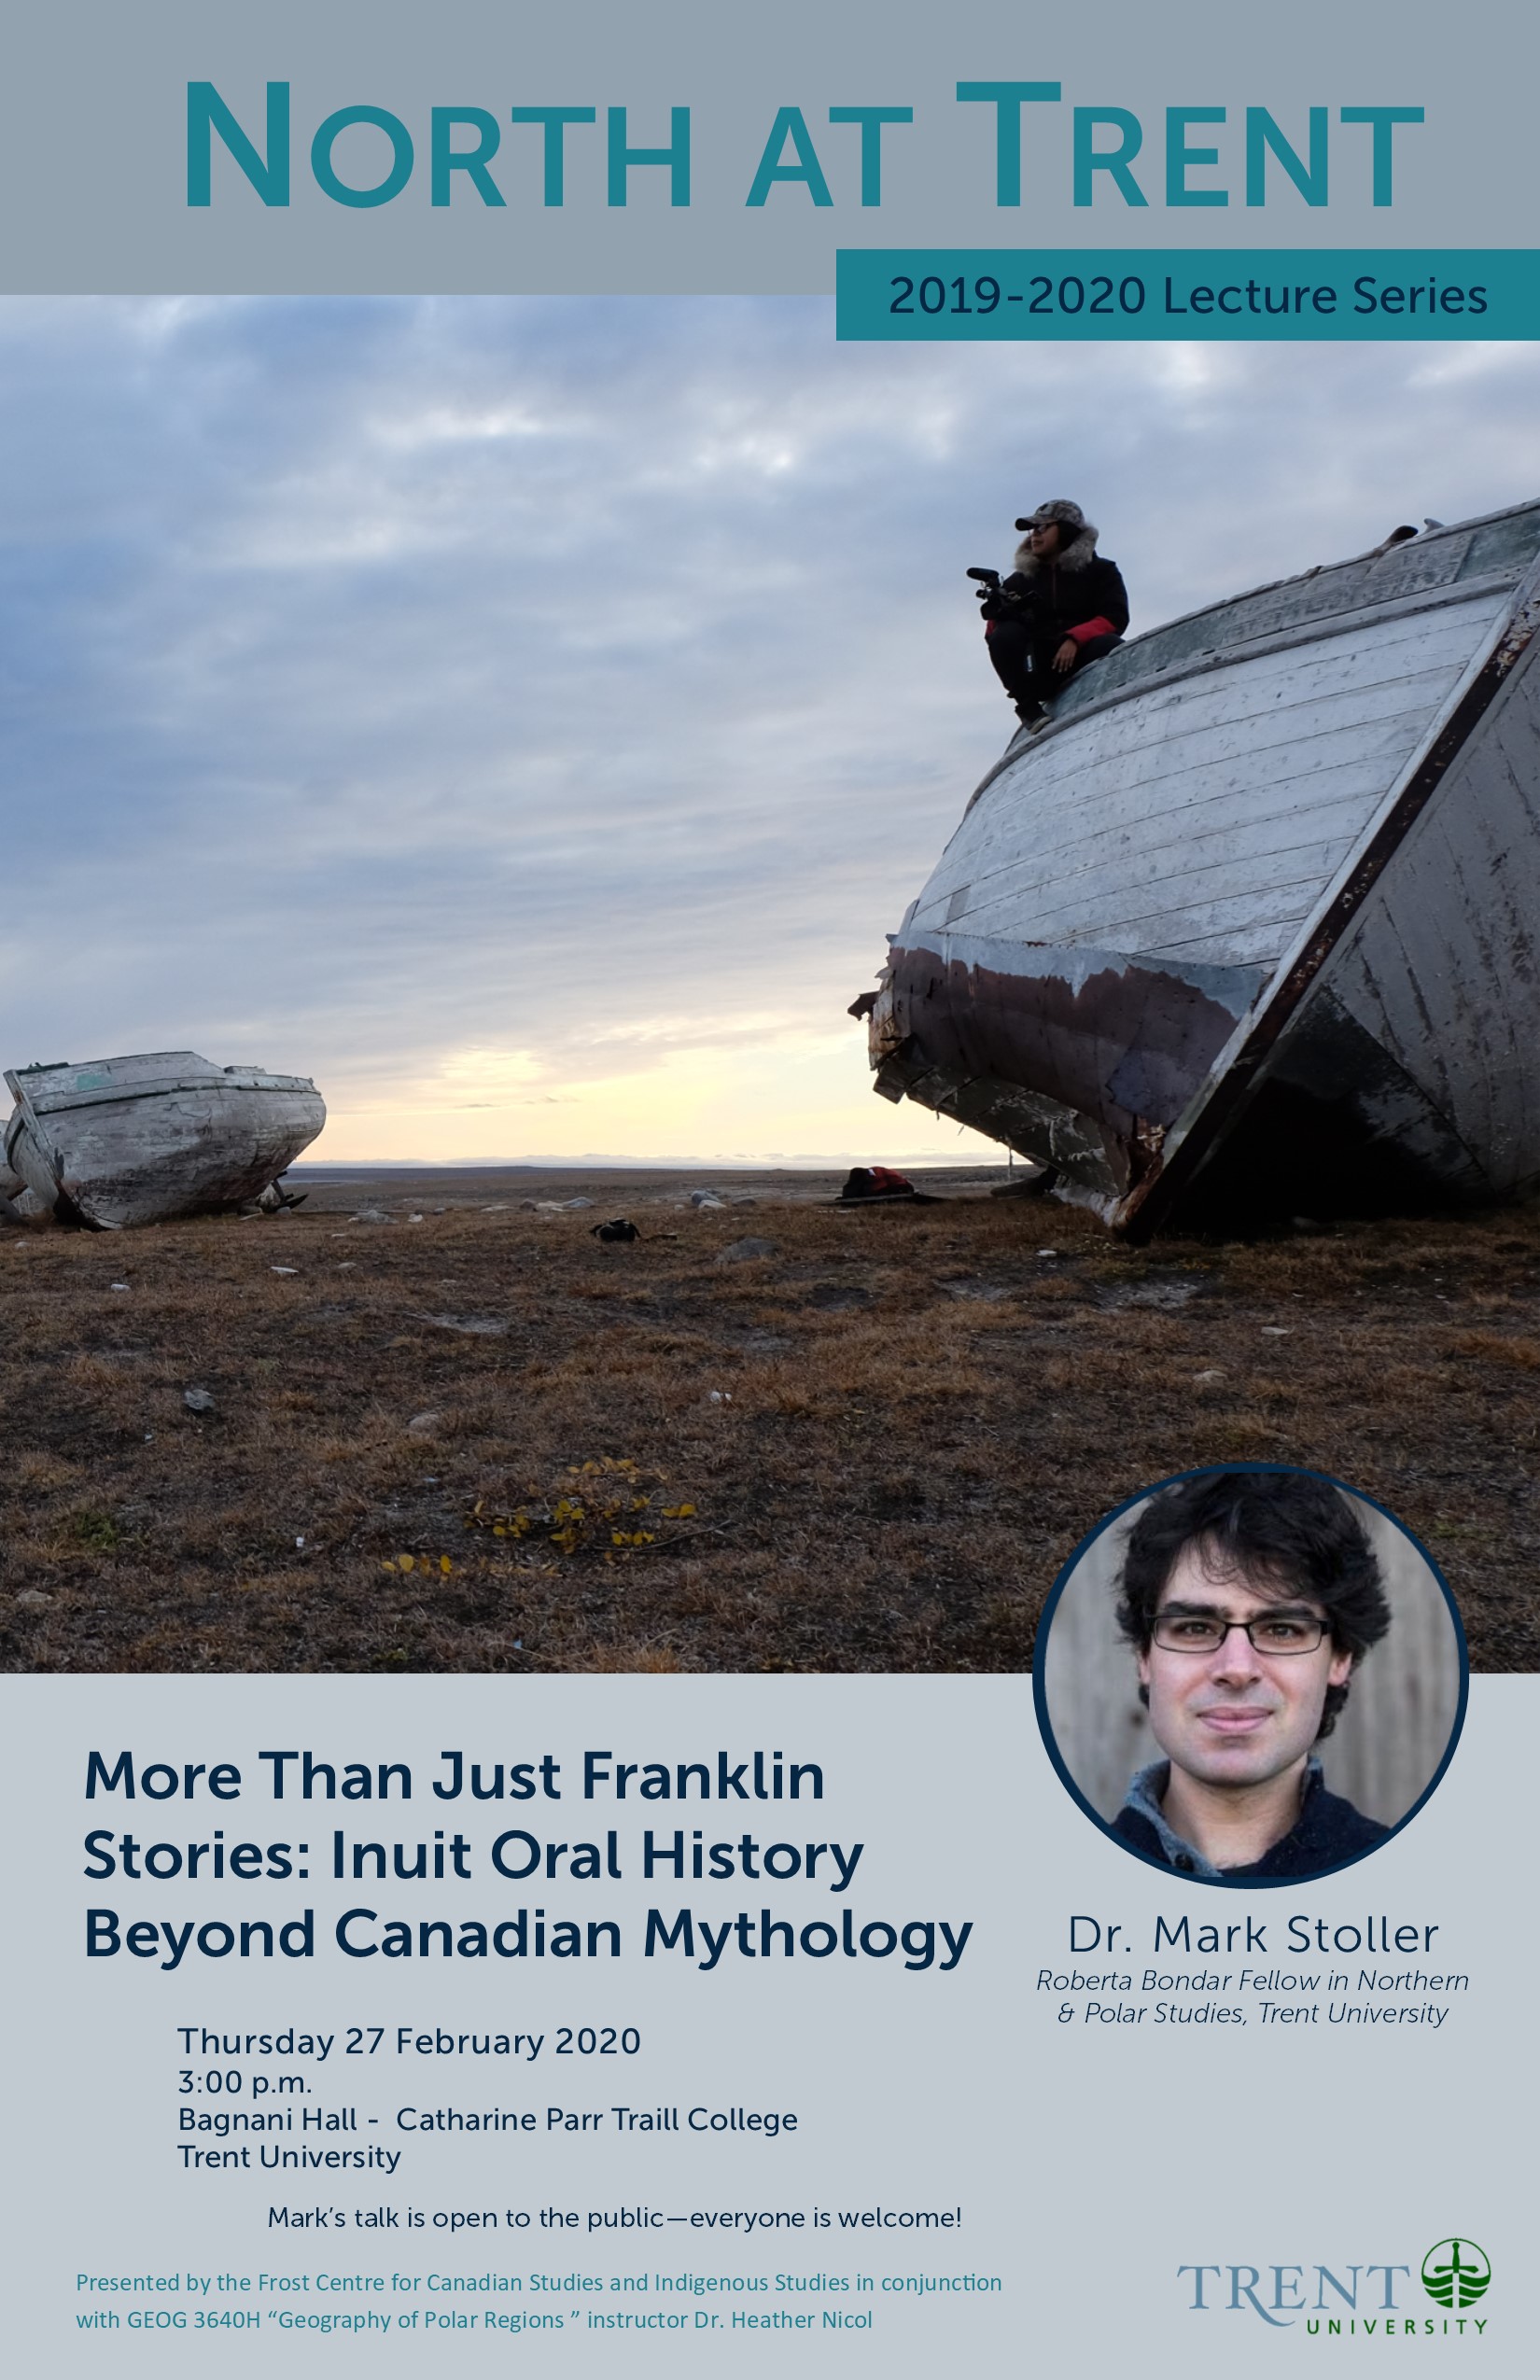 "More Than Just Franklin: Inuit Oral History Beyond Canadian Mythology" 27 February 2020 with Mark Stoller